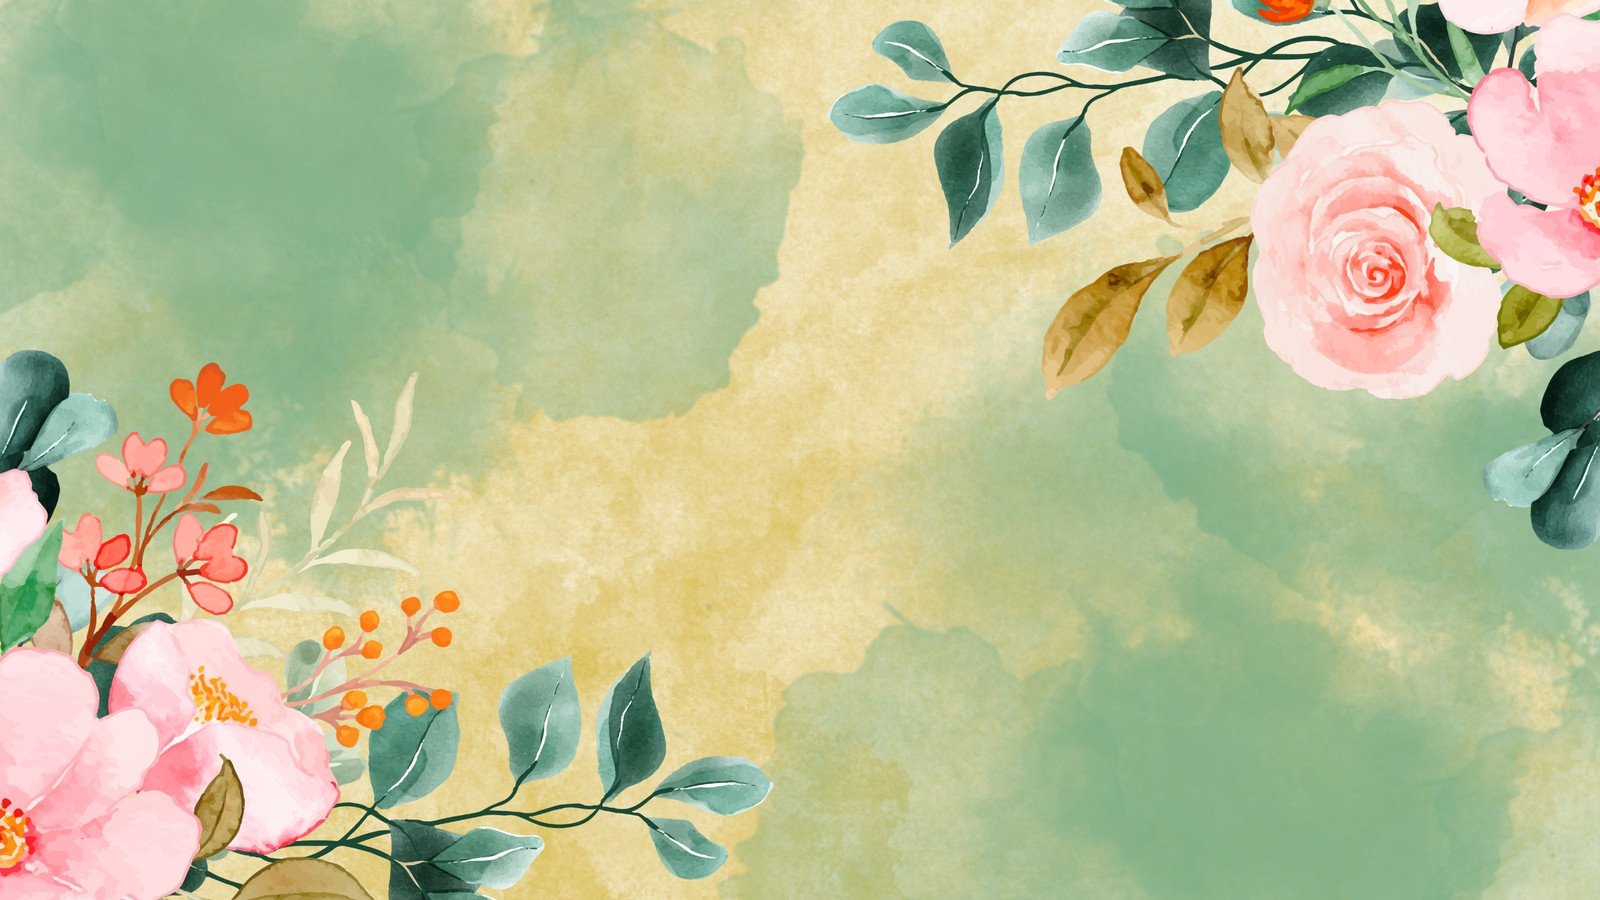 Page 3 - Free and customizable floral desktop wallpaper templates | Canva